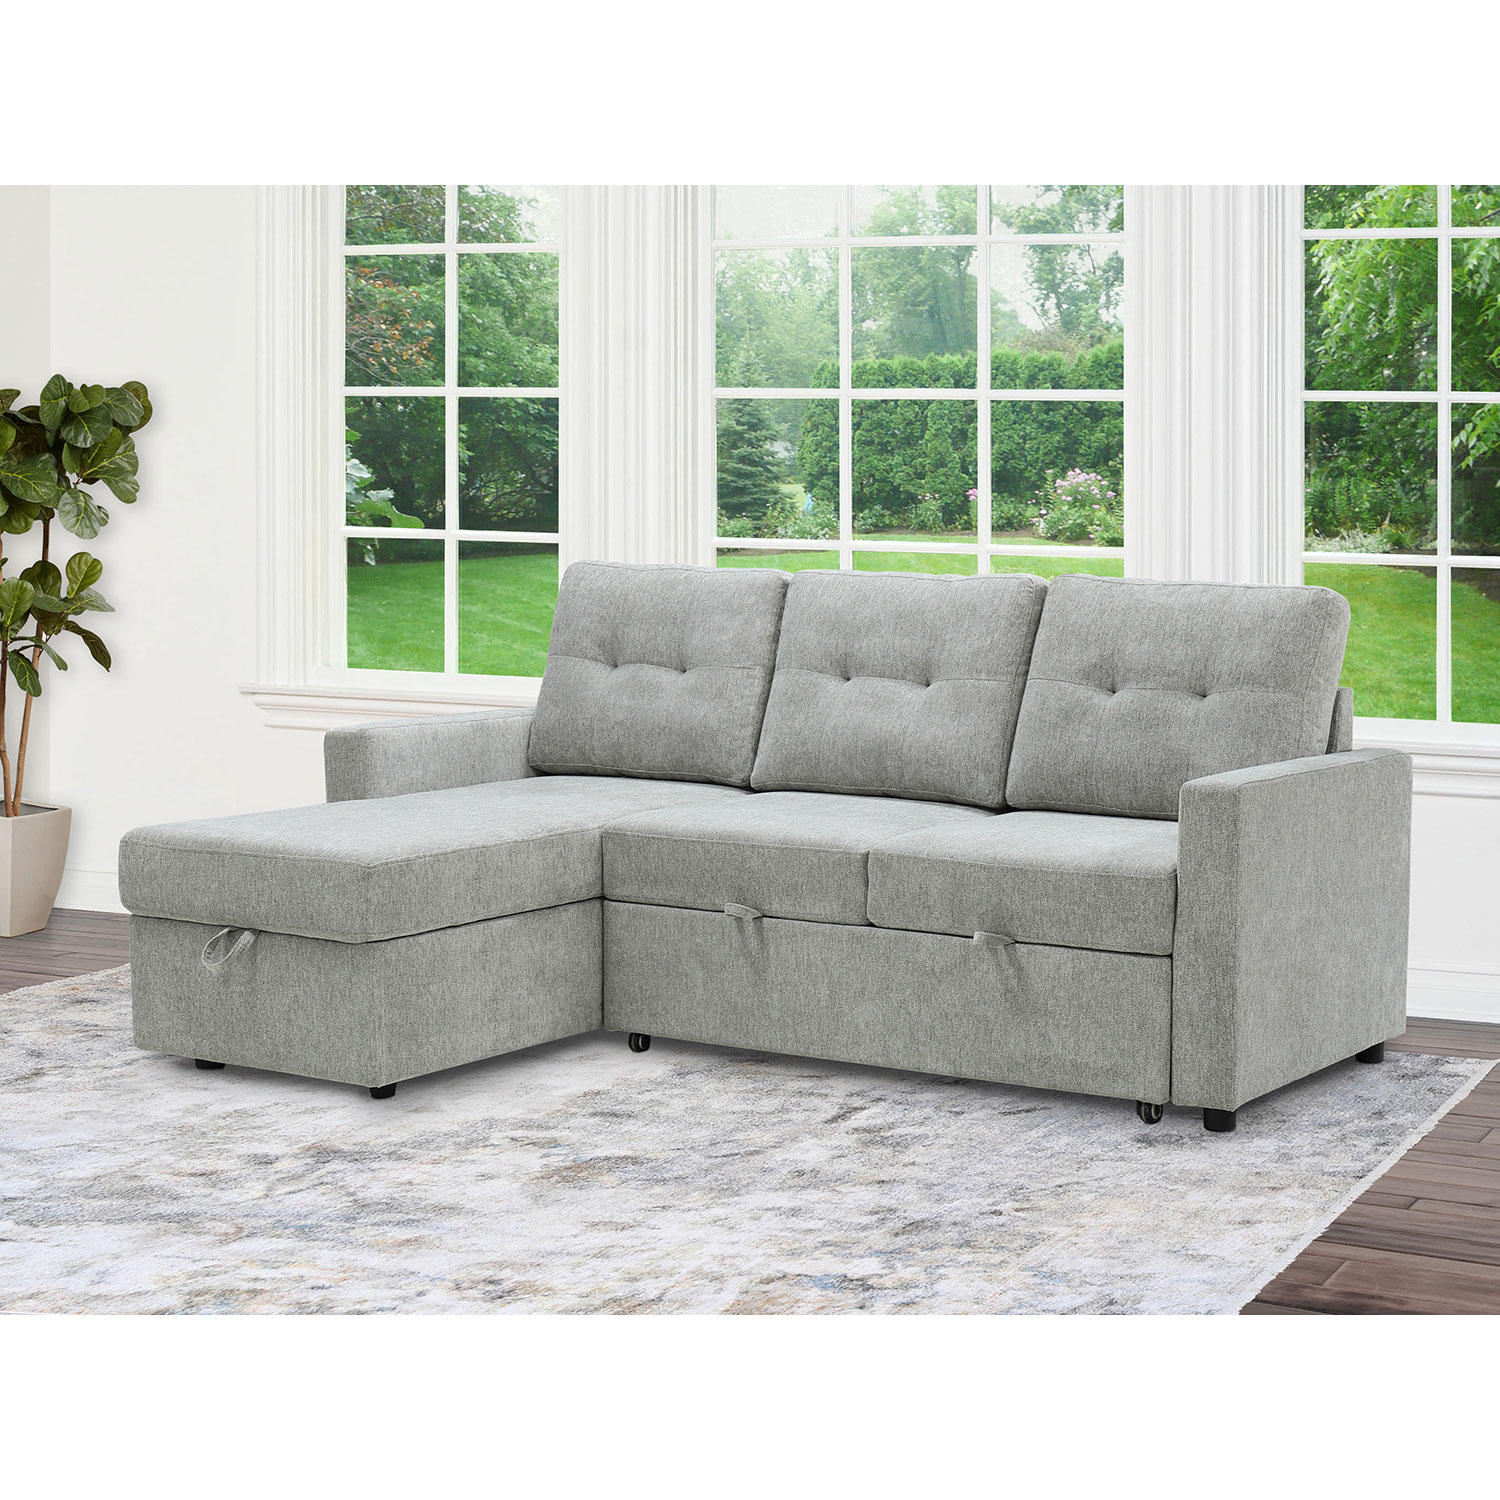 Kylie Reversible Storage Sectional Sofa with Pullout Bed